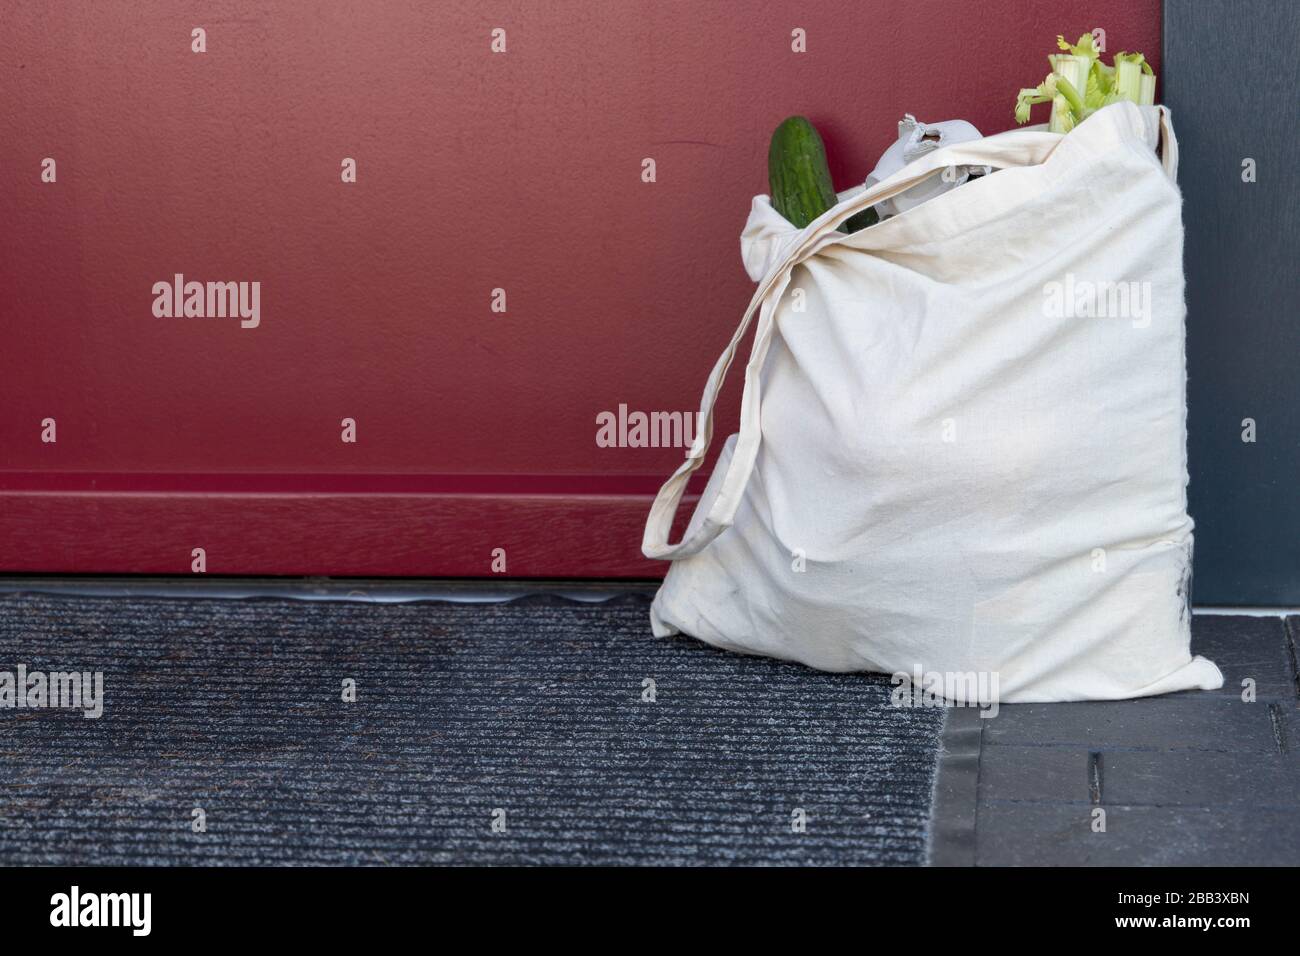 shopping as neighborly help for high-risk group Stock Photo